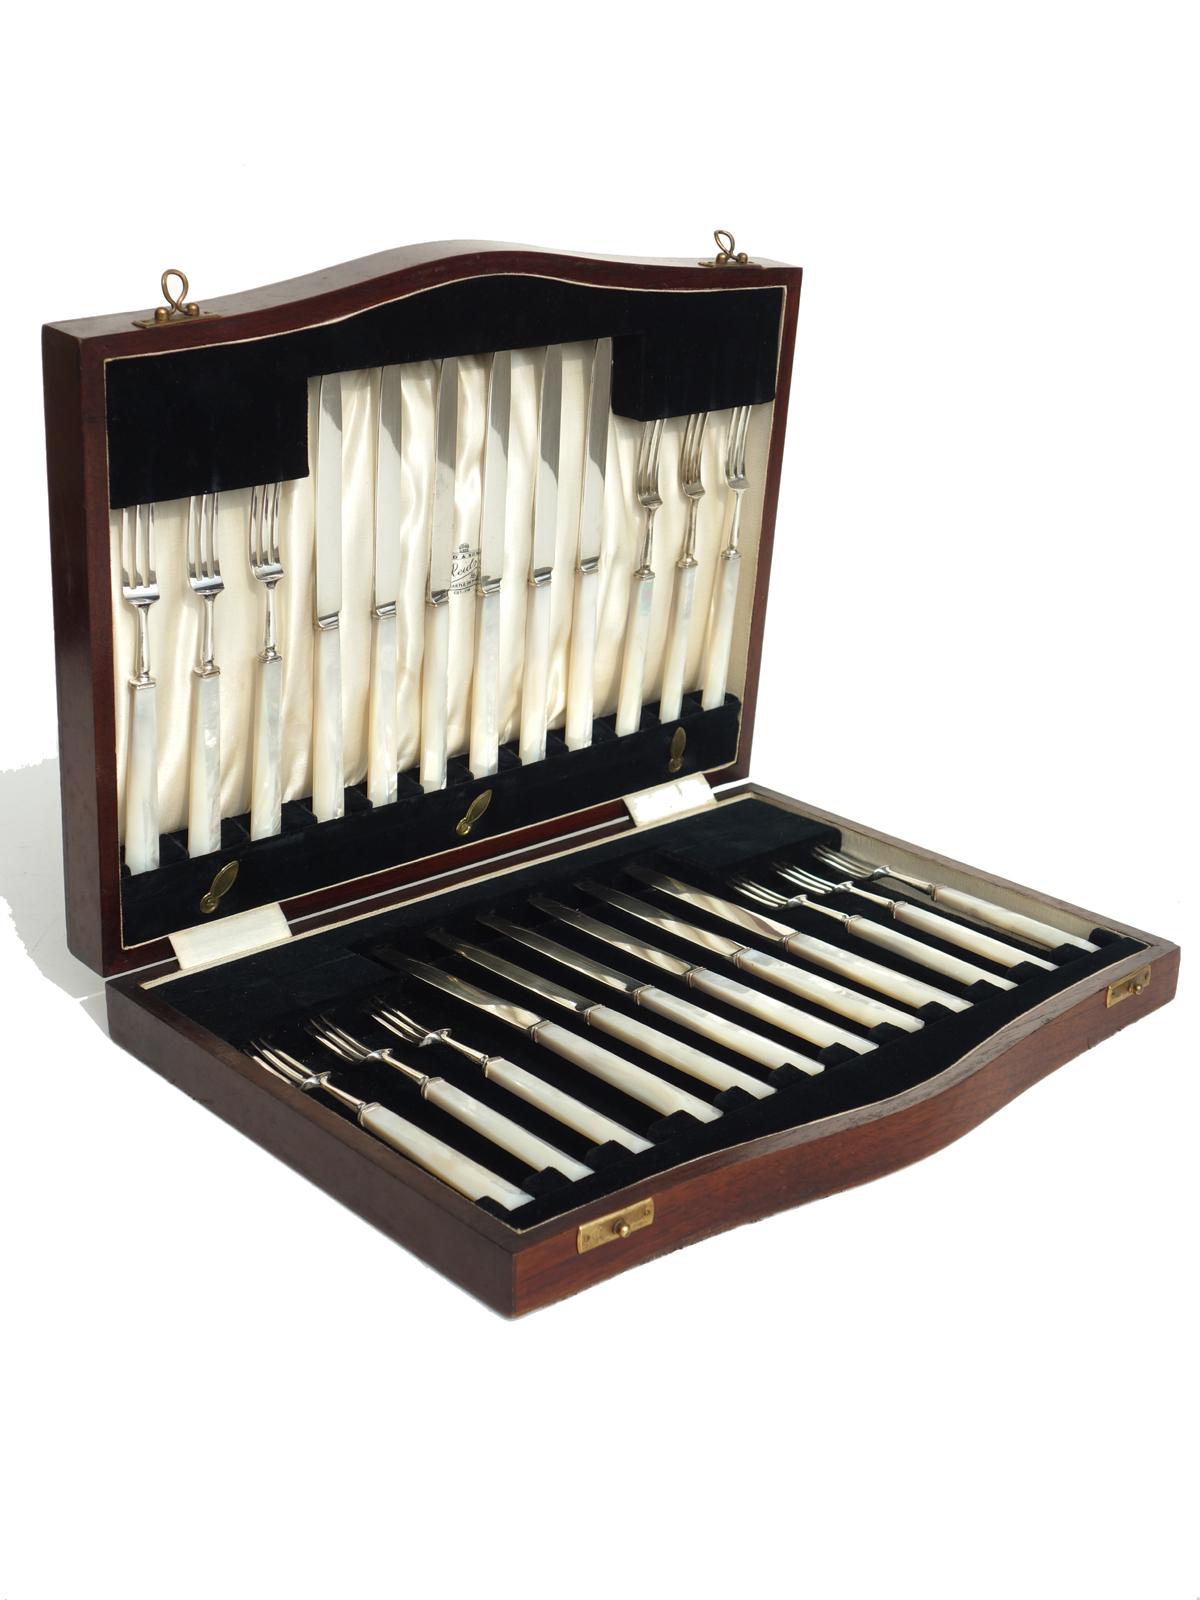 Silver Flatware, England 1920s 
A set of 12 knives and 12 forks with real mother of pearl handles. 
Original wooden box. 
Knife 20 cm. Fork 16 cm
Excellent Condiction.